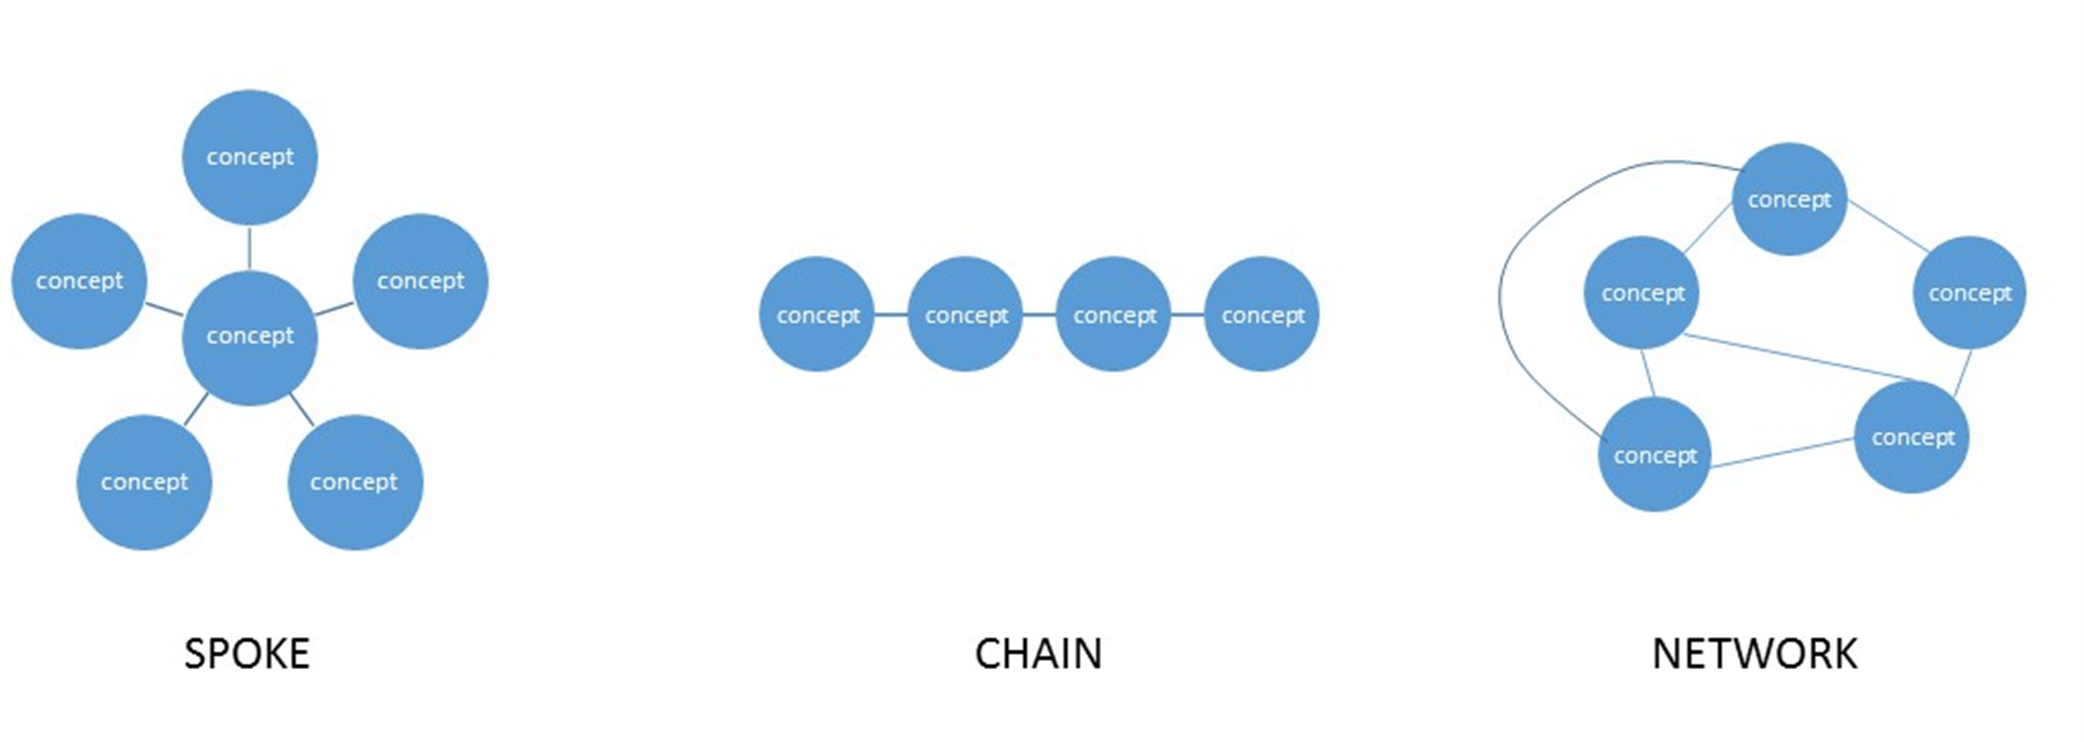 Diagram showing three different concept map structures. The first called 'spoke' has a concept in the centre and further concepts around the outside, each linked to the centre concept. The second is a chain, with each concept linked in a linear chain. The third structure is a network with structures linked together in a non-standard